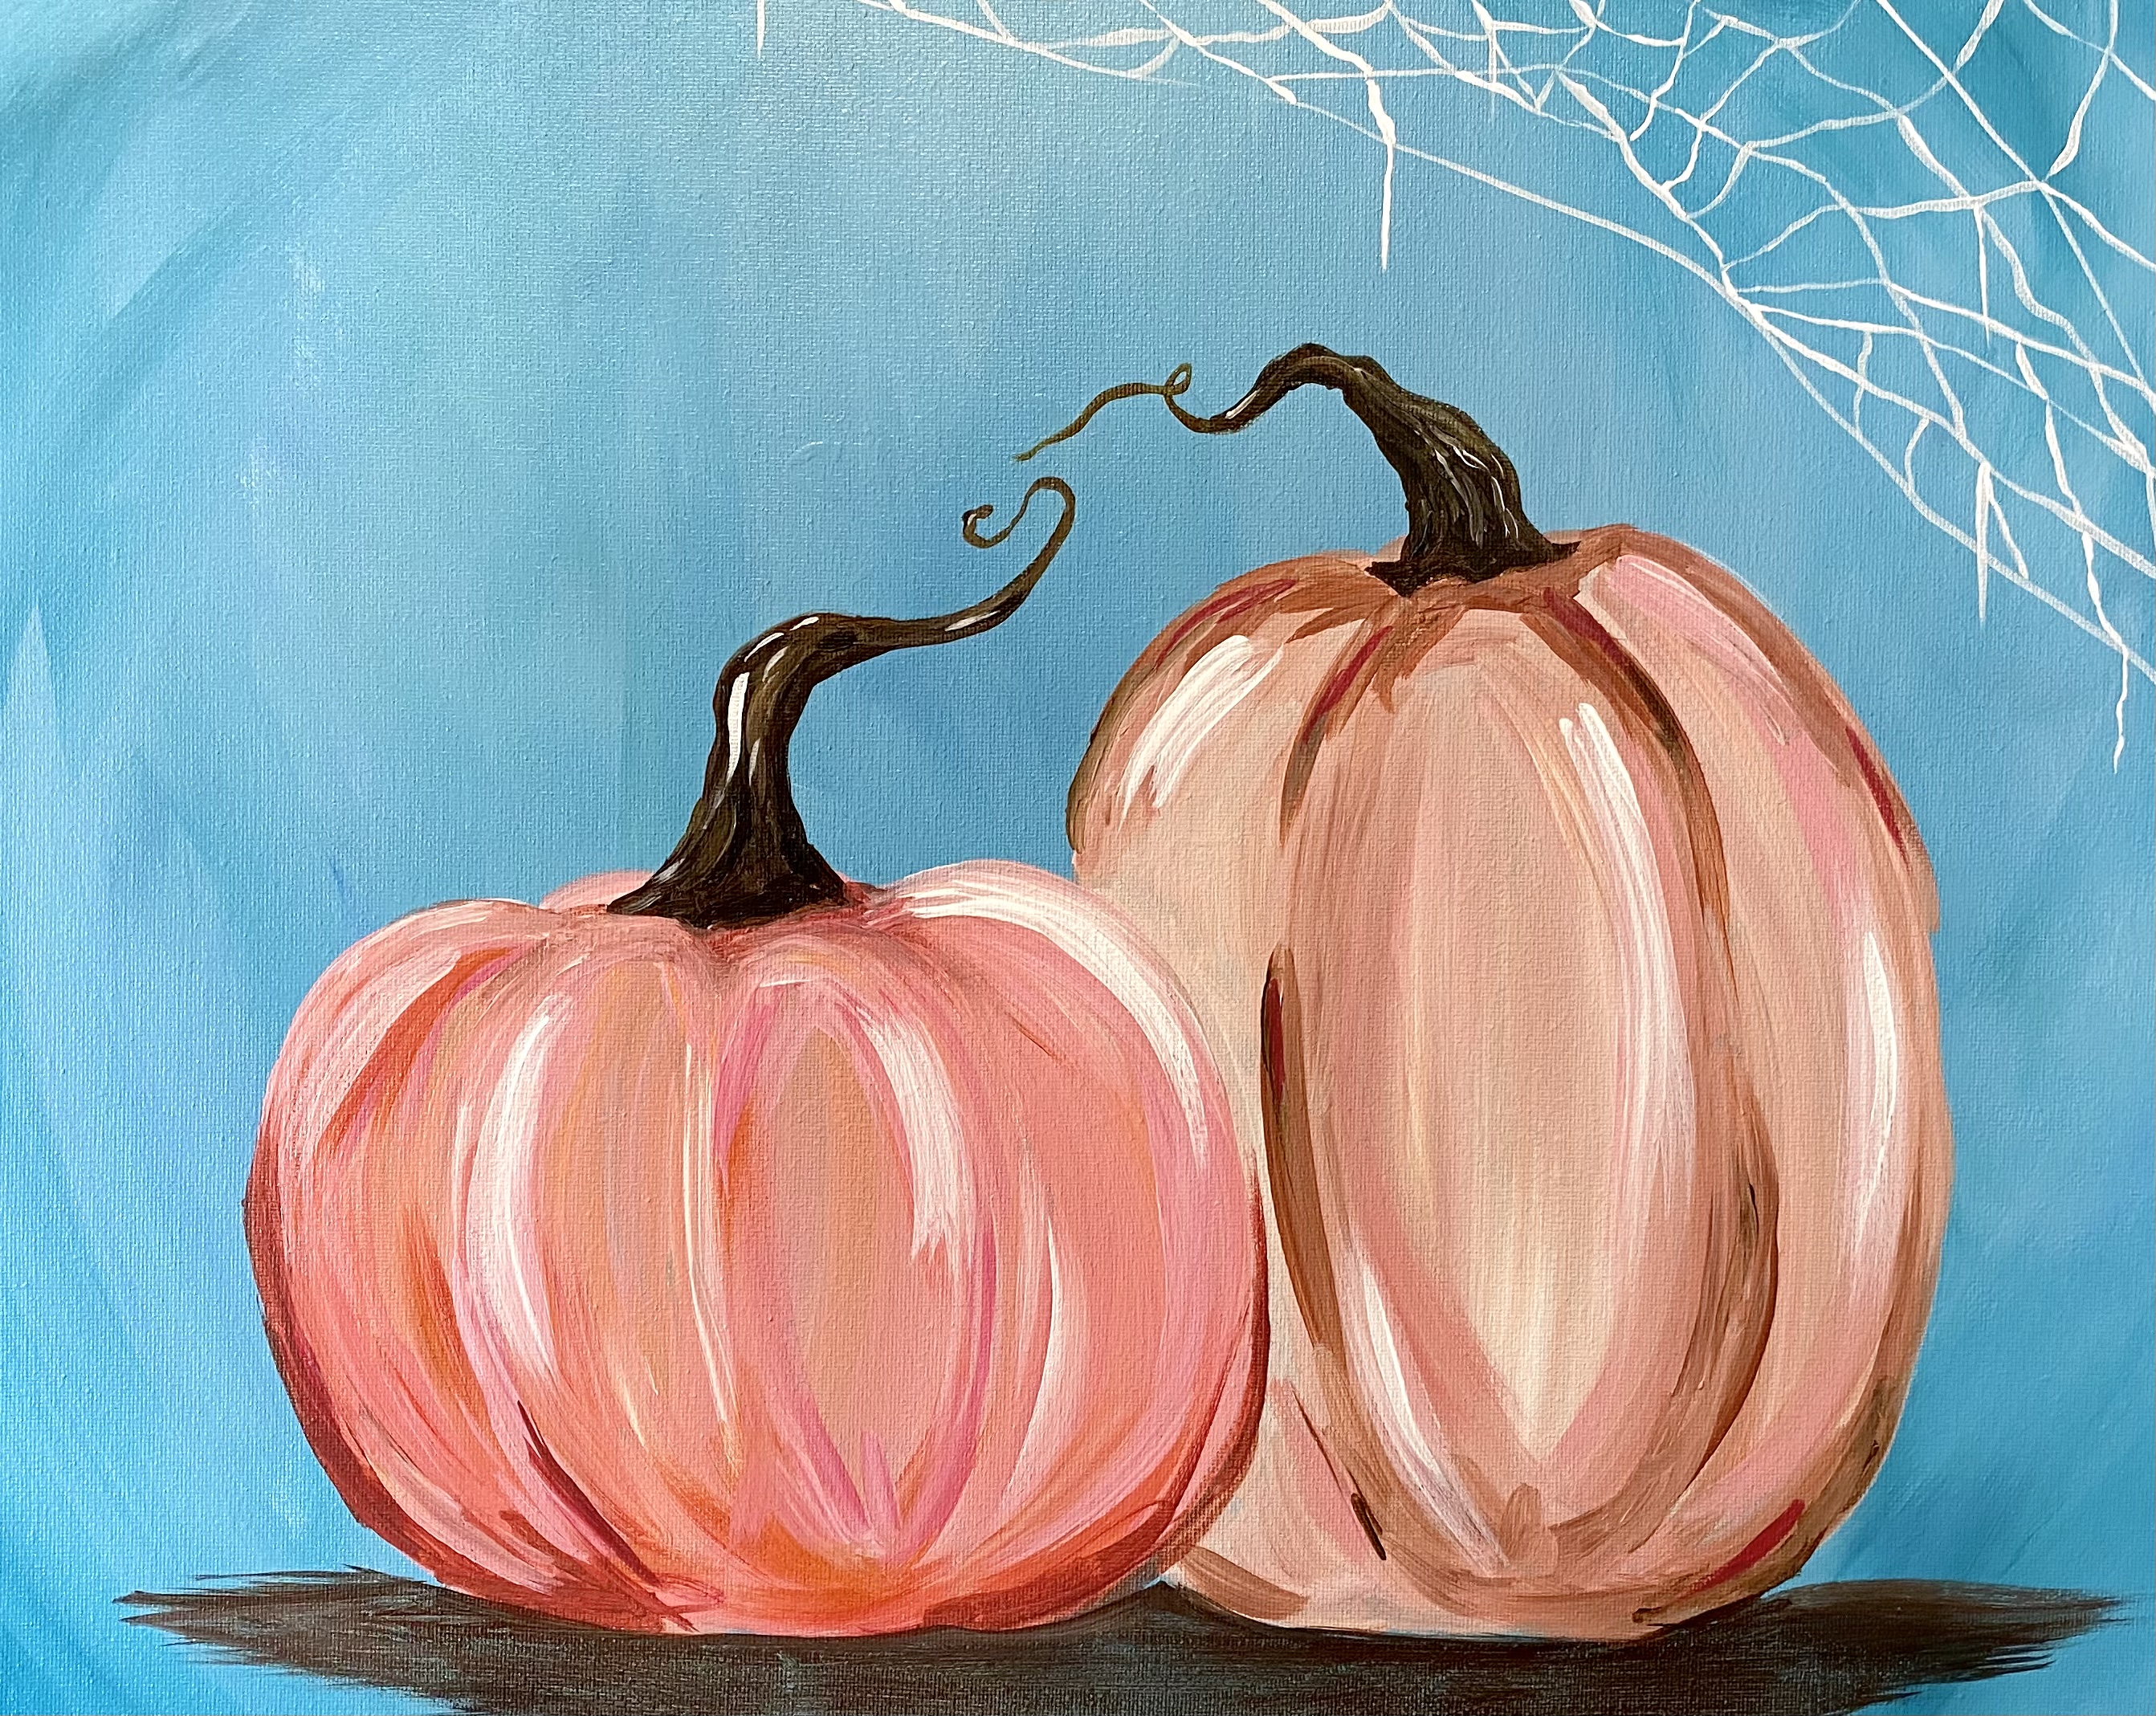 A Pastel Pumpkins  experience project by Yaymaker